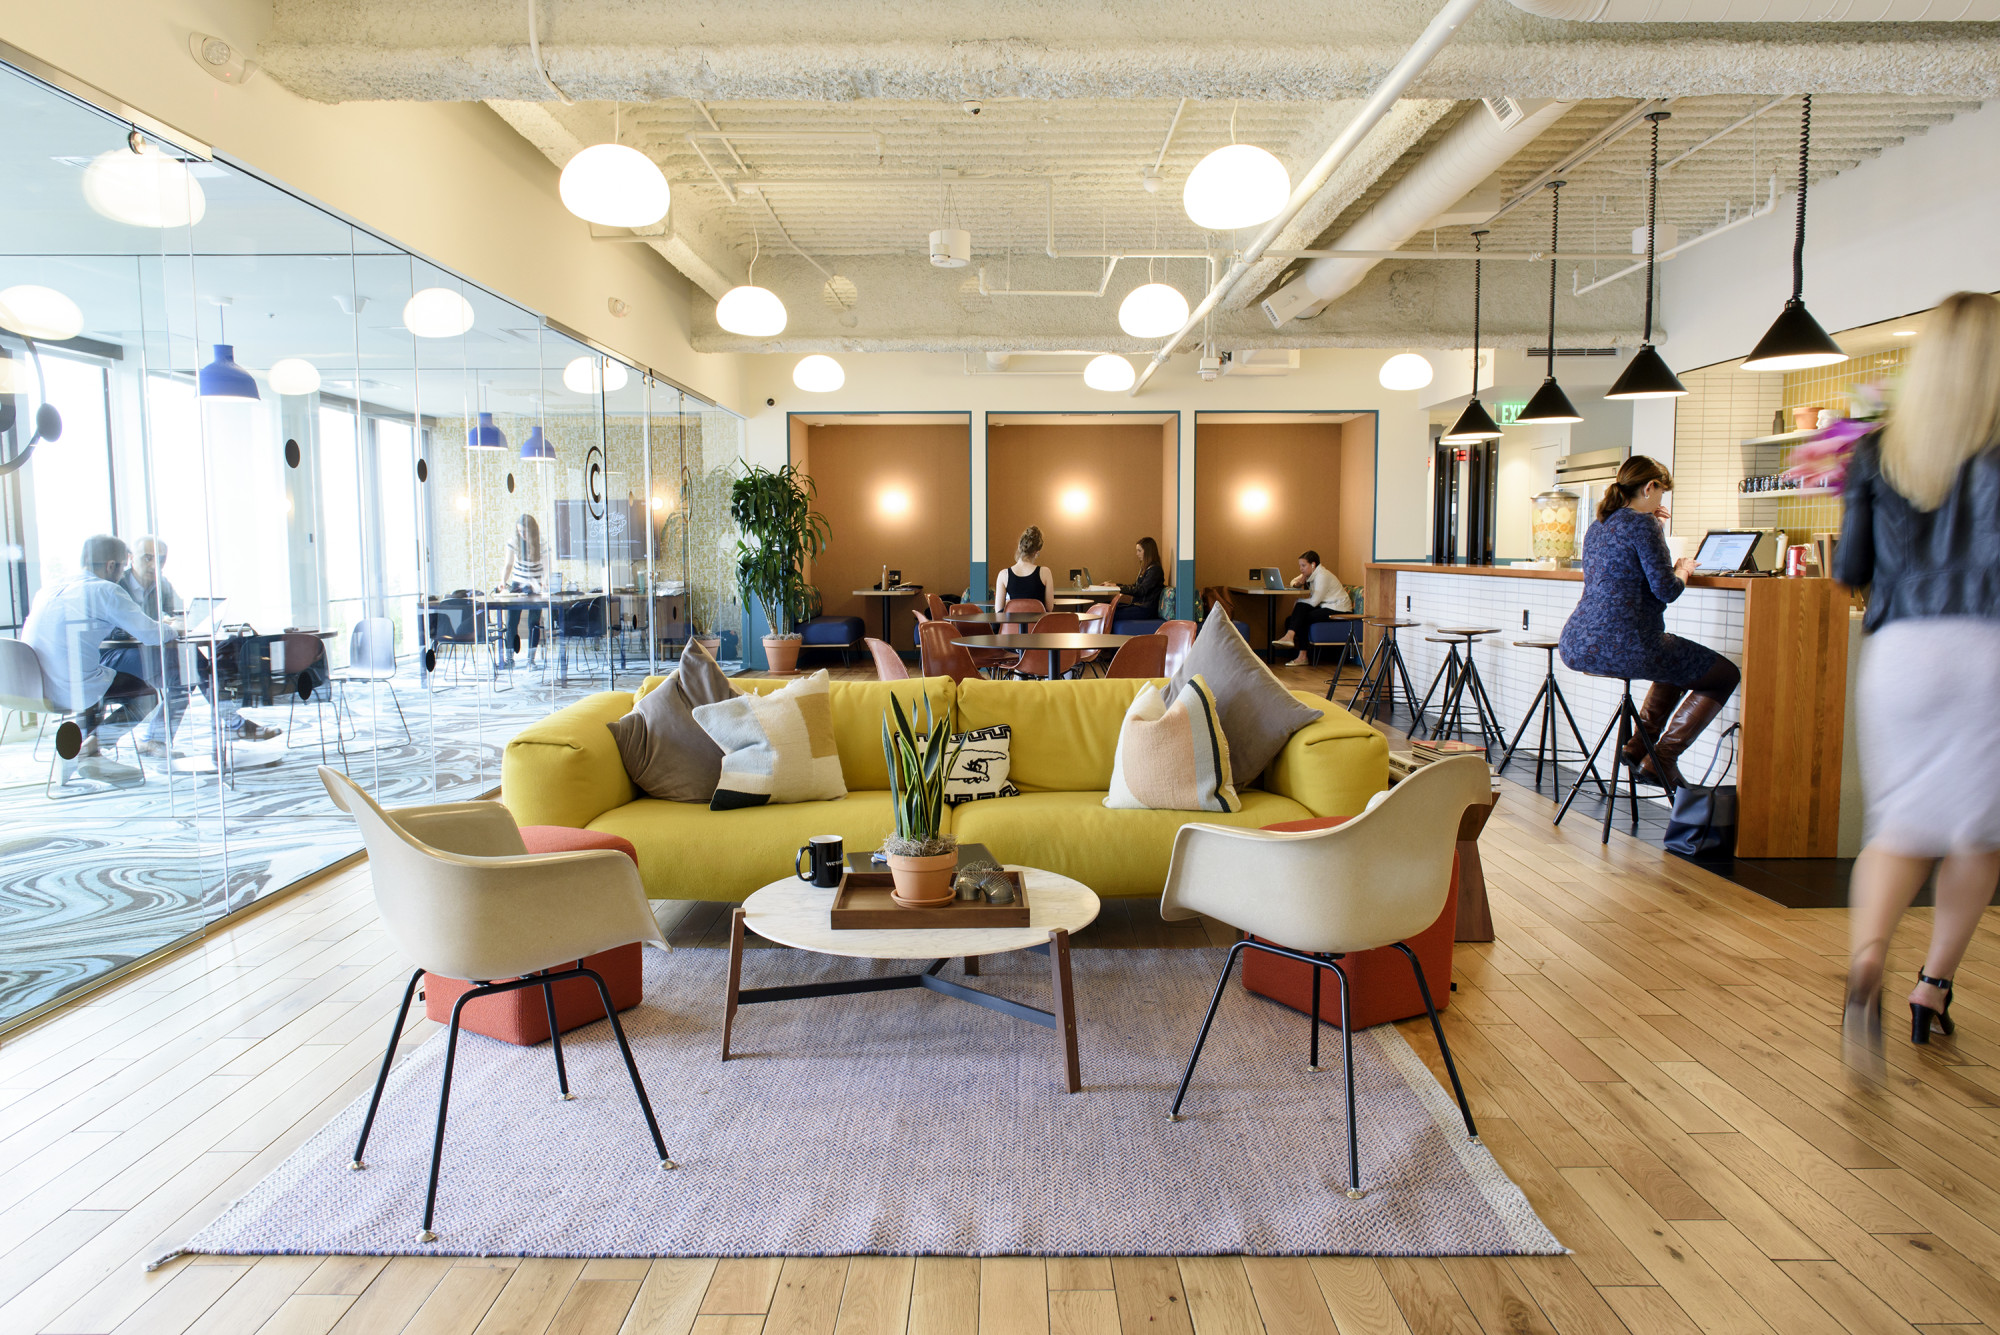 Children will be learning collaboration, the WeWork way | IT Pro